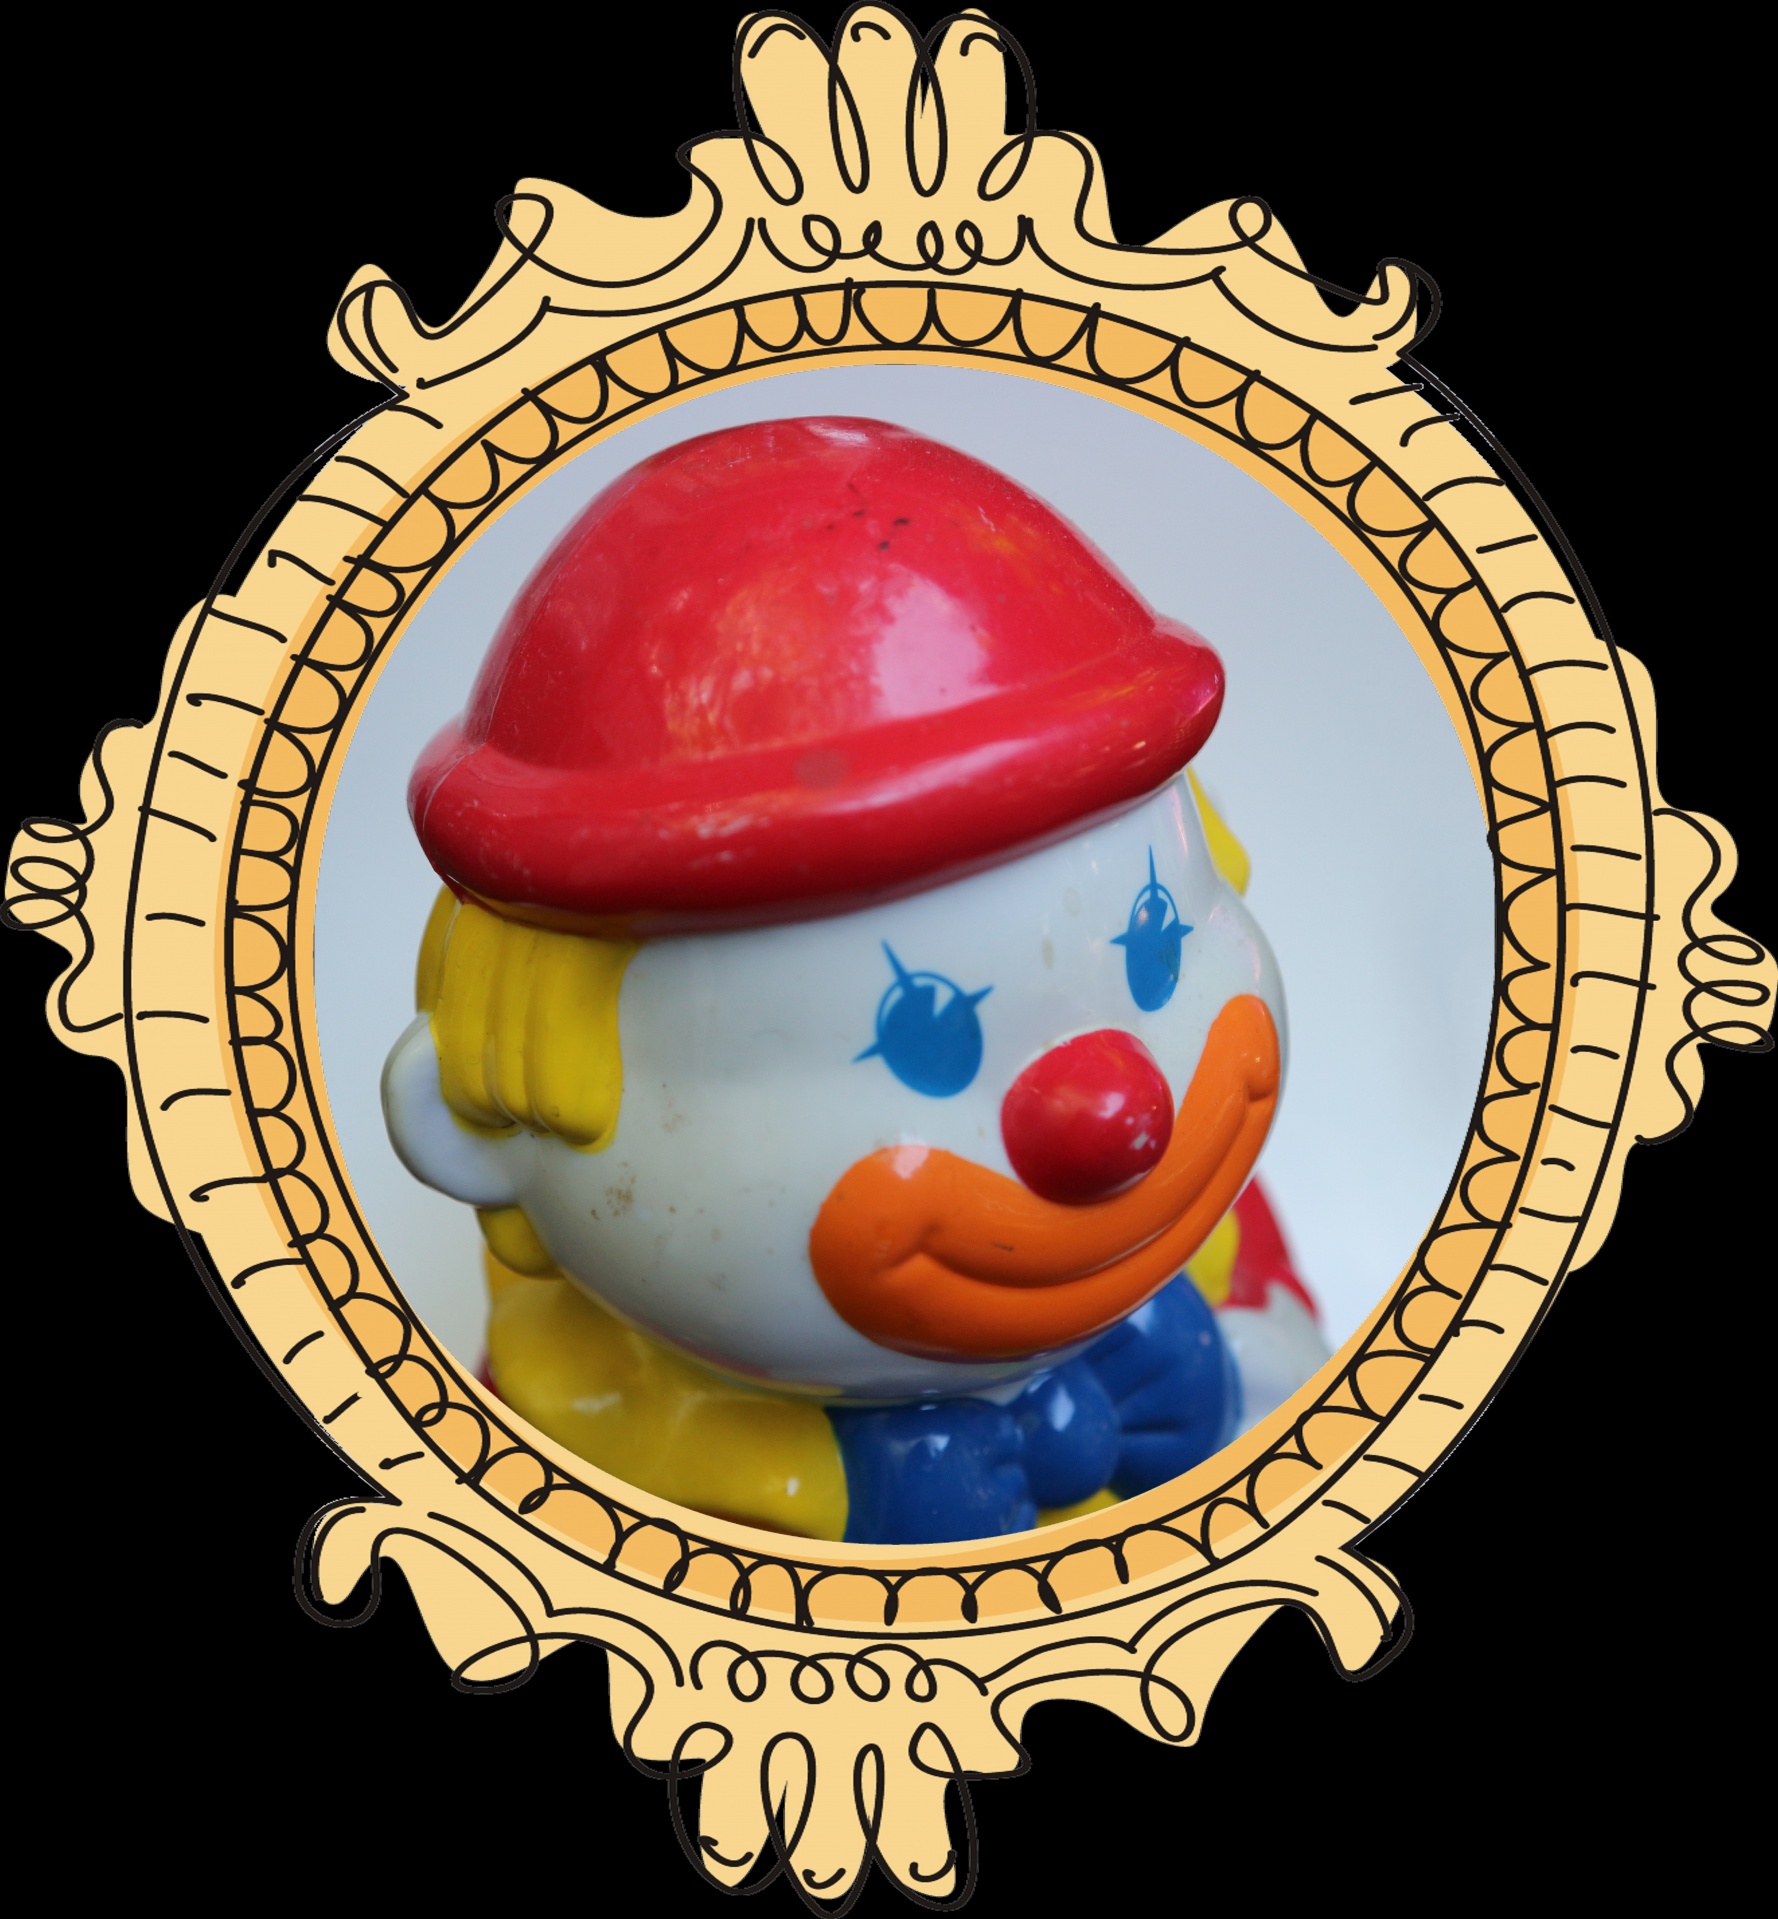 clown face oval free photo